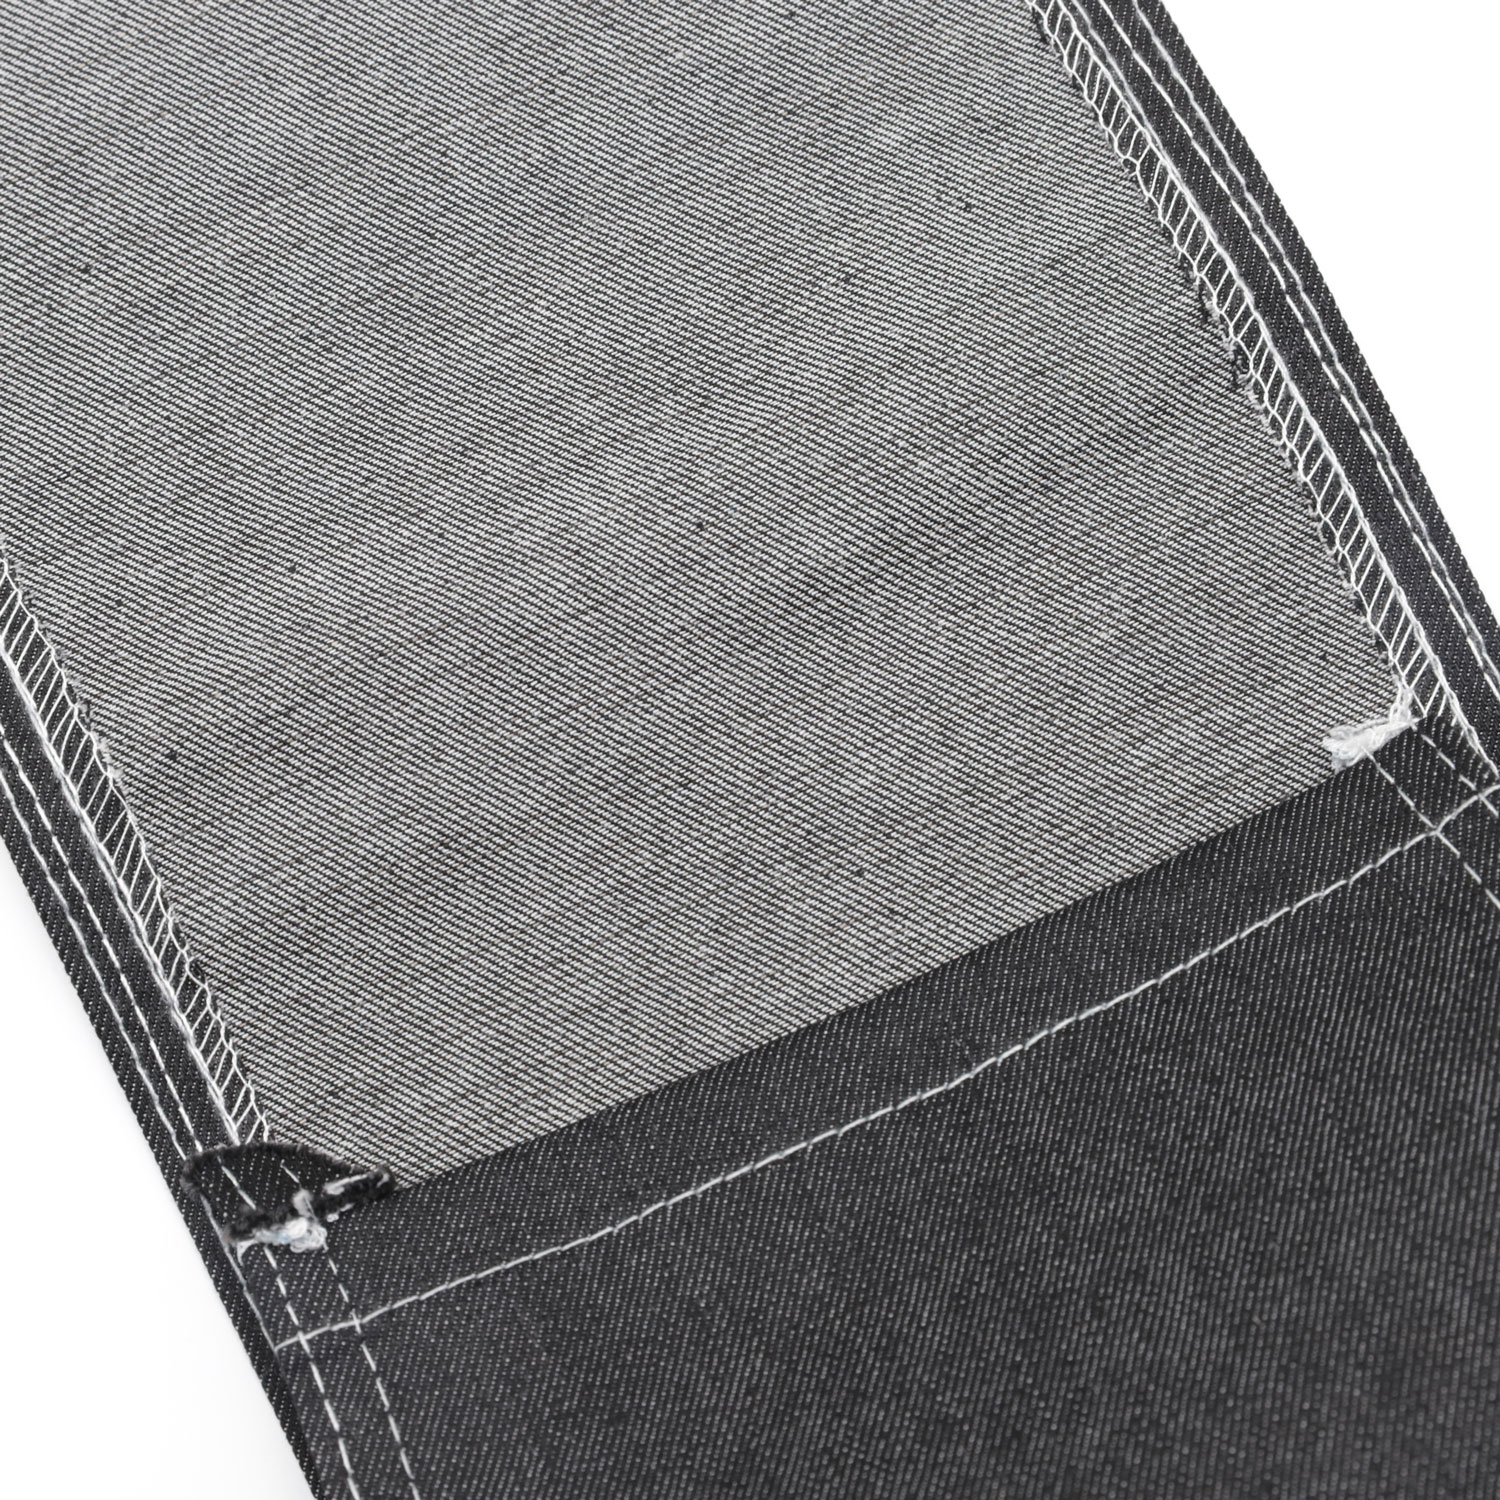 A Brief Overview on the 4 Way Stretch Denim Fabric 1